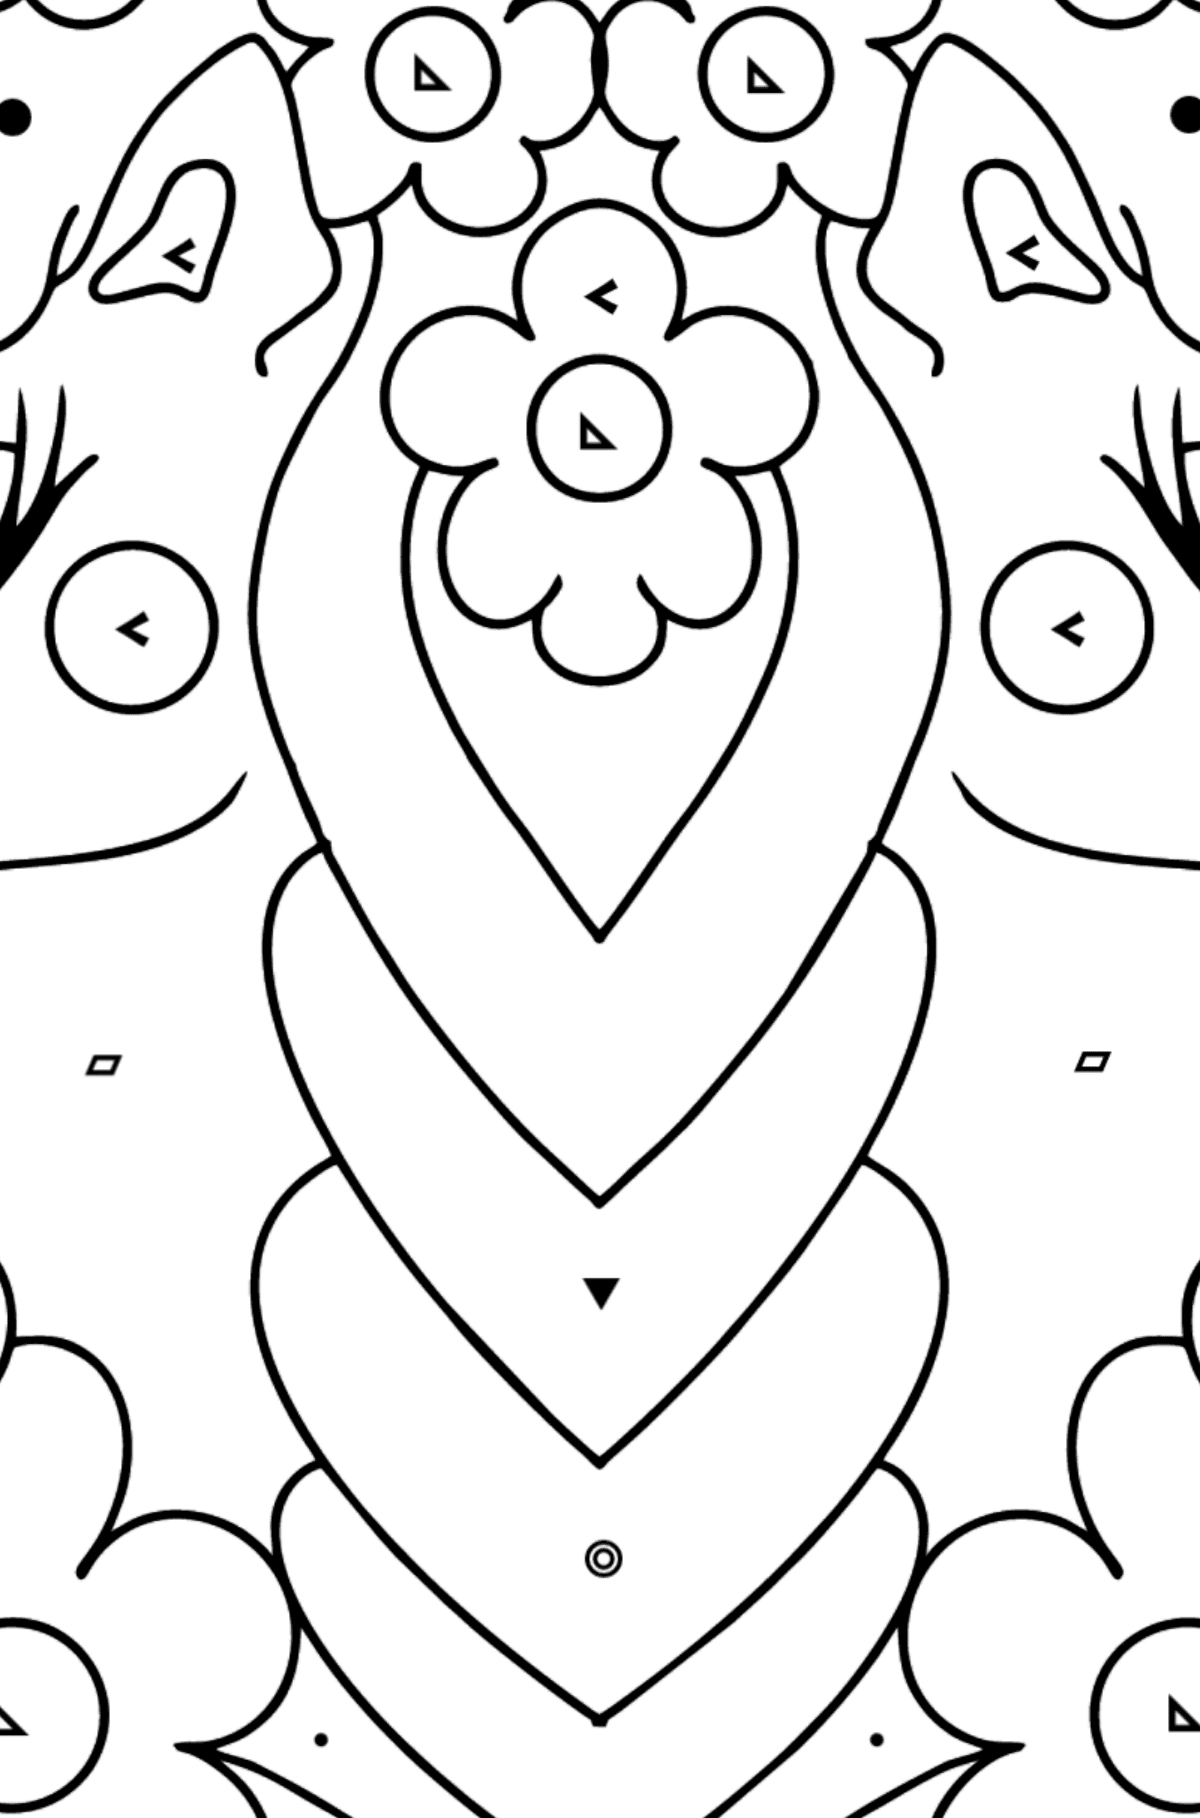 Coloring page cartoon Unicorn - Coloring by Symbols and Geometric Shapes for Kids